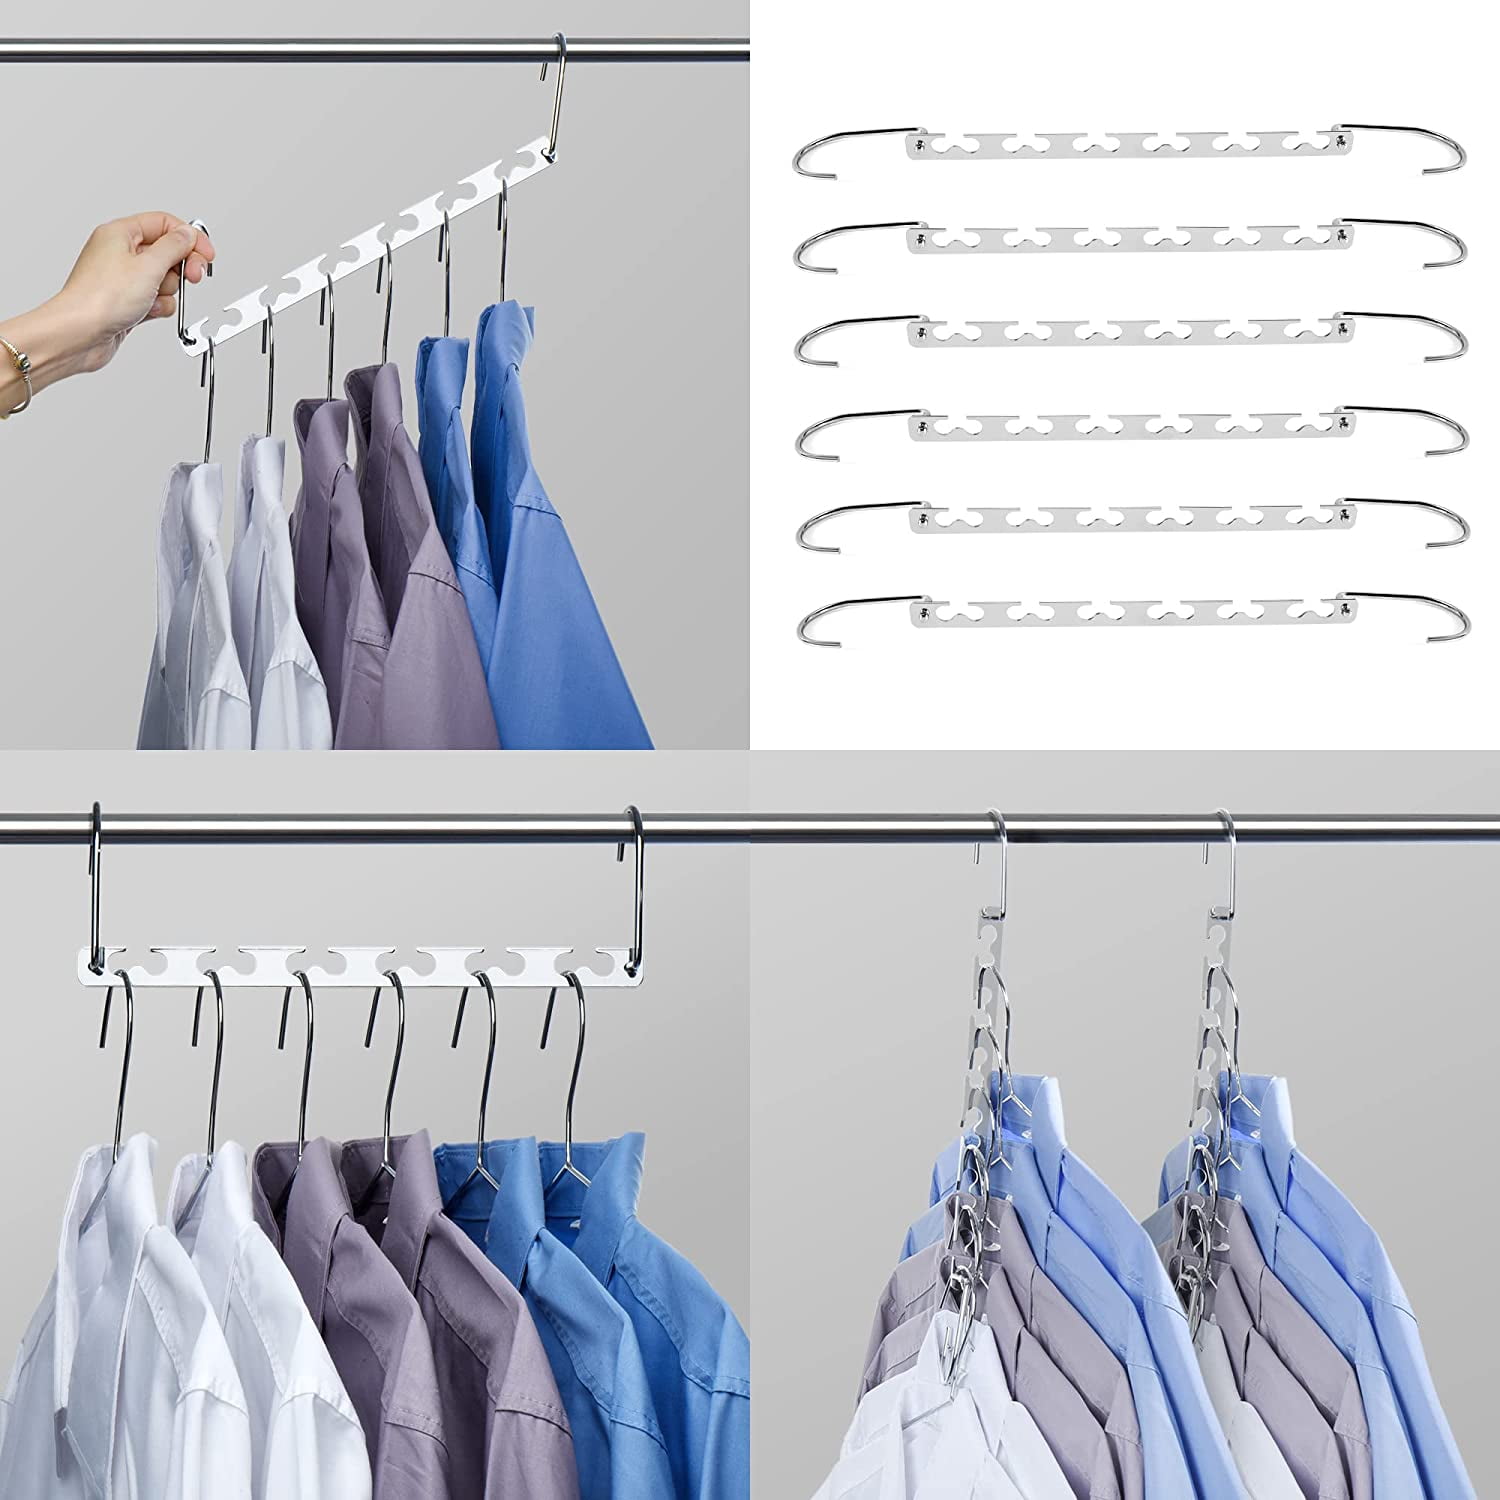 DUCOO Space Saving Hangers, 10pcs Magic Hangers, 5 Holes Sturdy Plastic Clothes Closet Organizers and Storage, Space Saver Organization, College Dorm